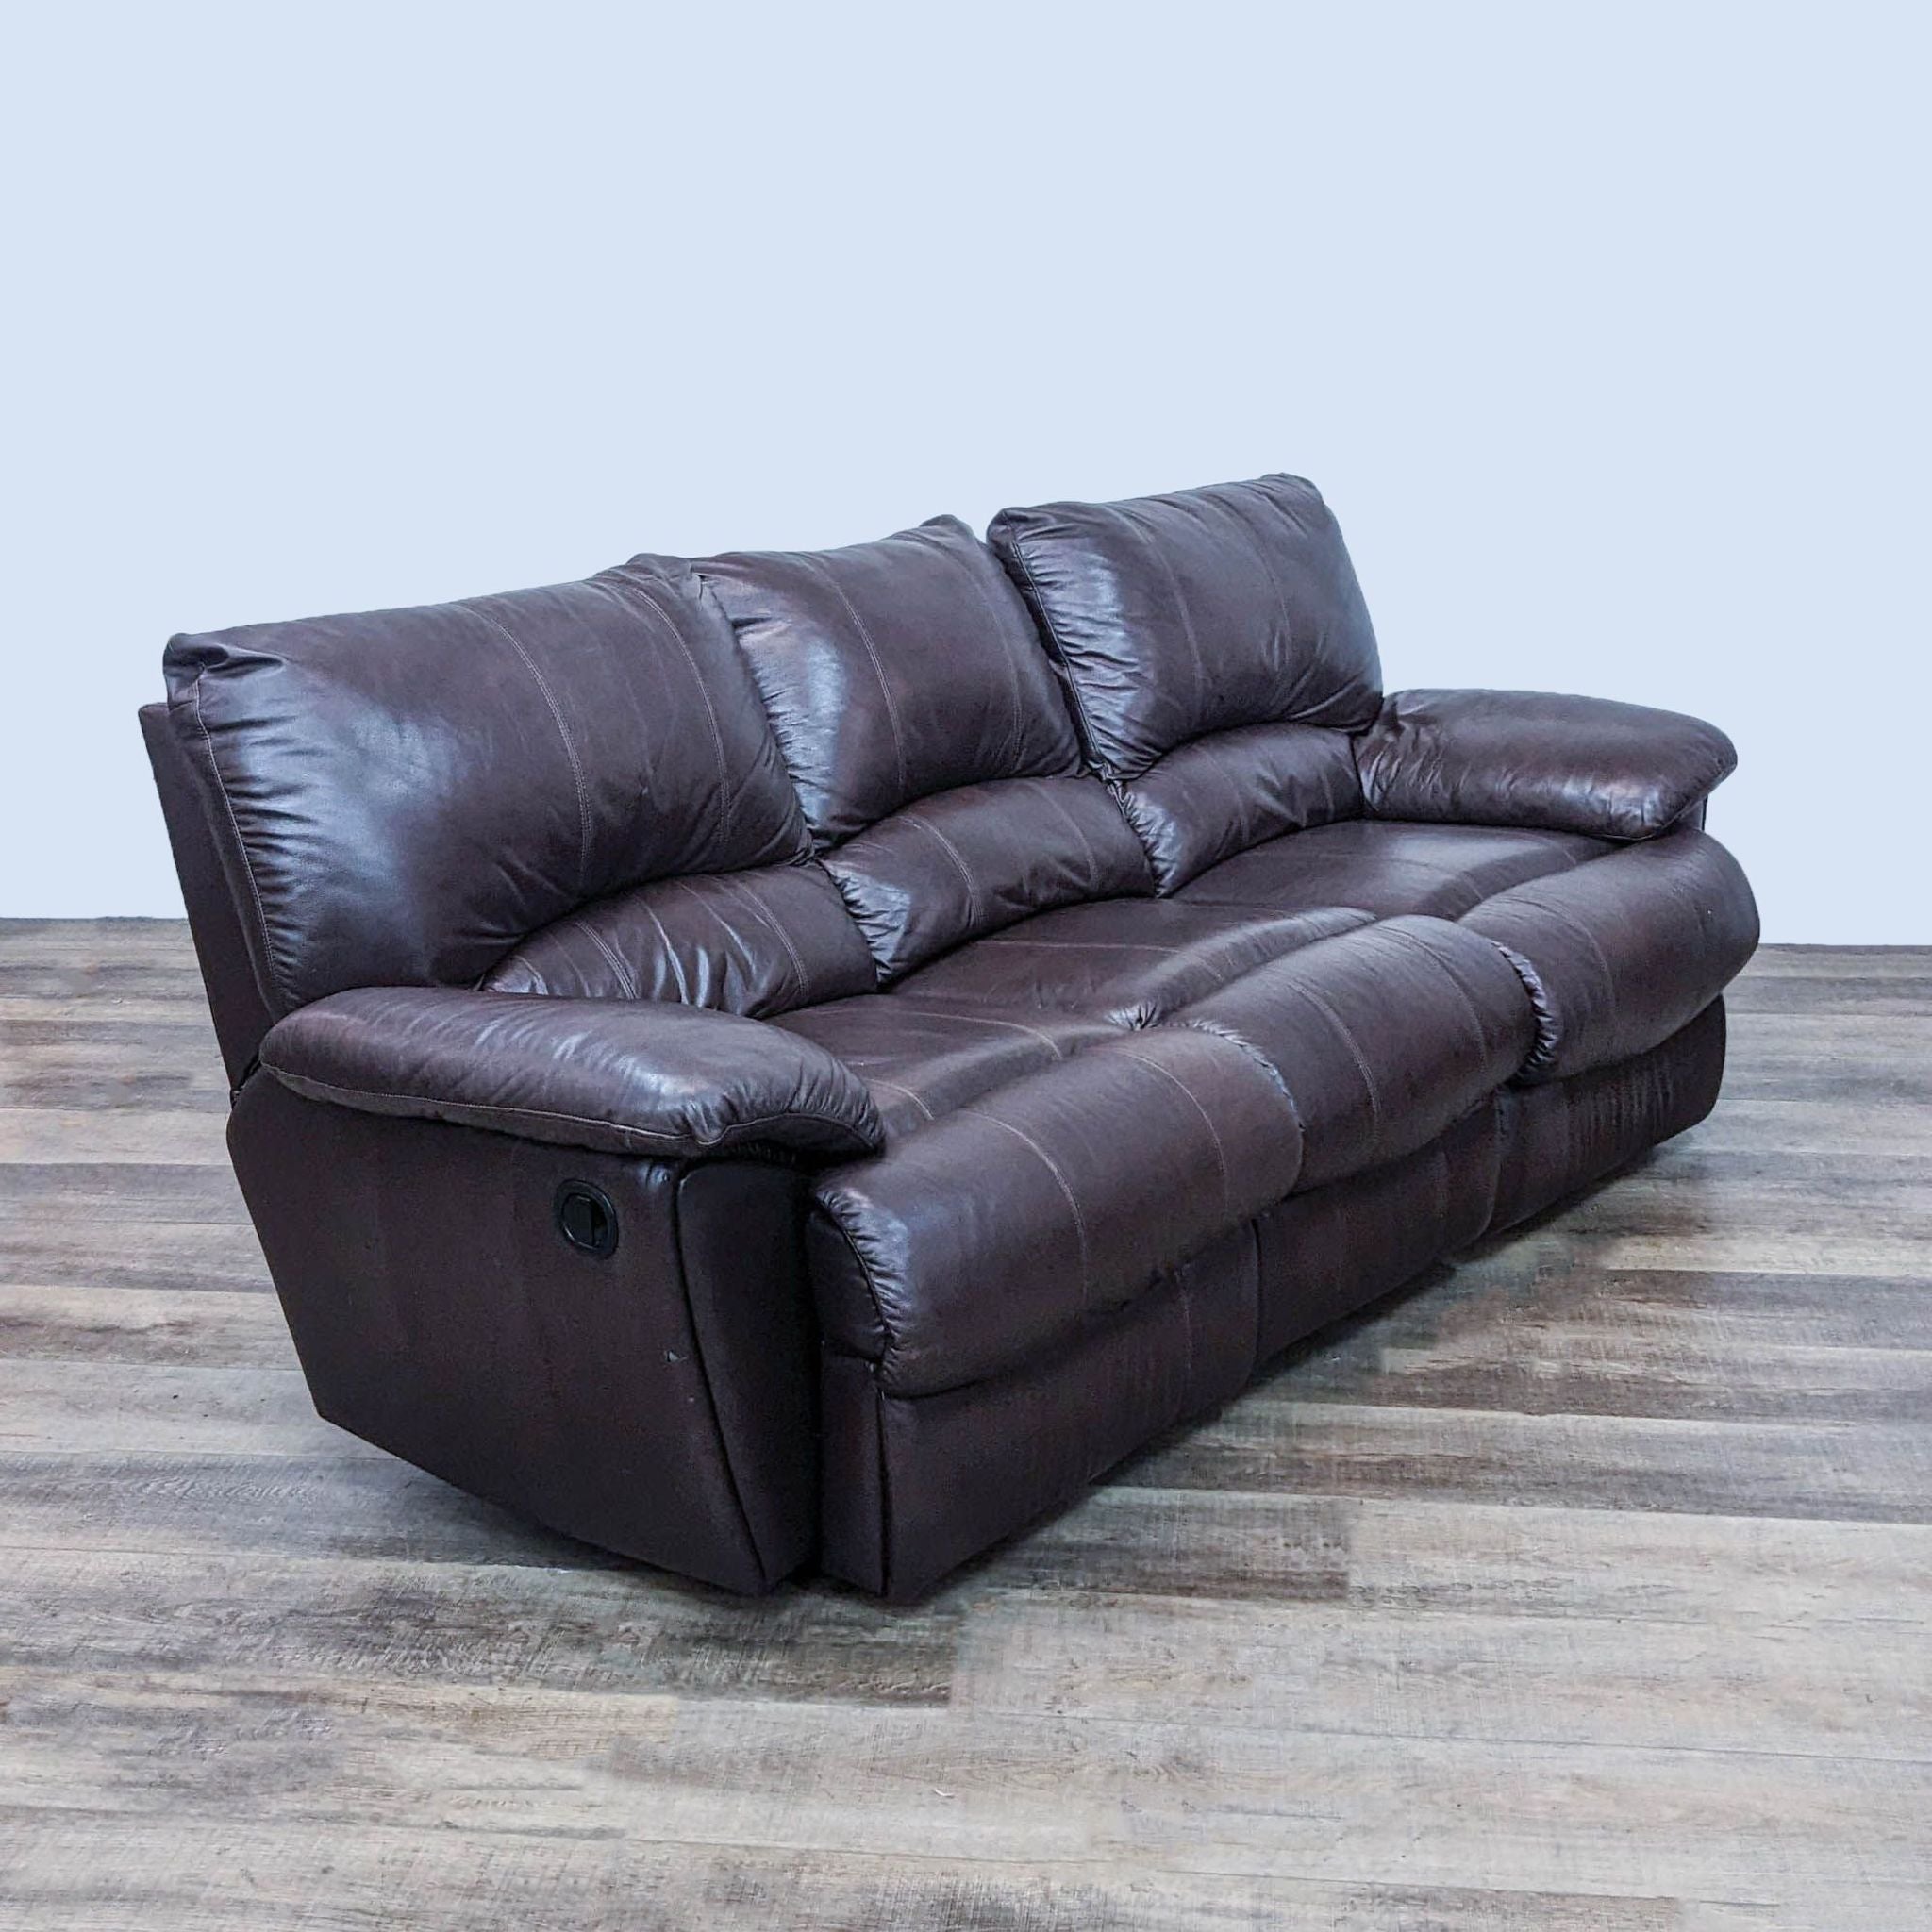 Reperch 3-seat high back leather look sofa with pillow top arms on a wooden floor.